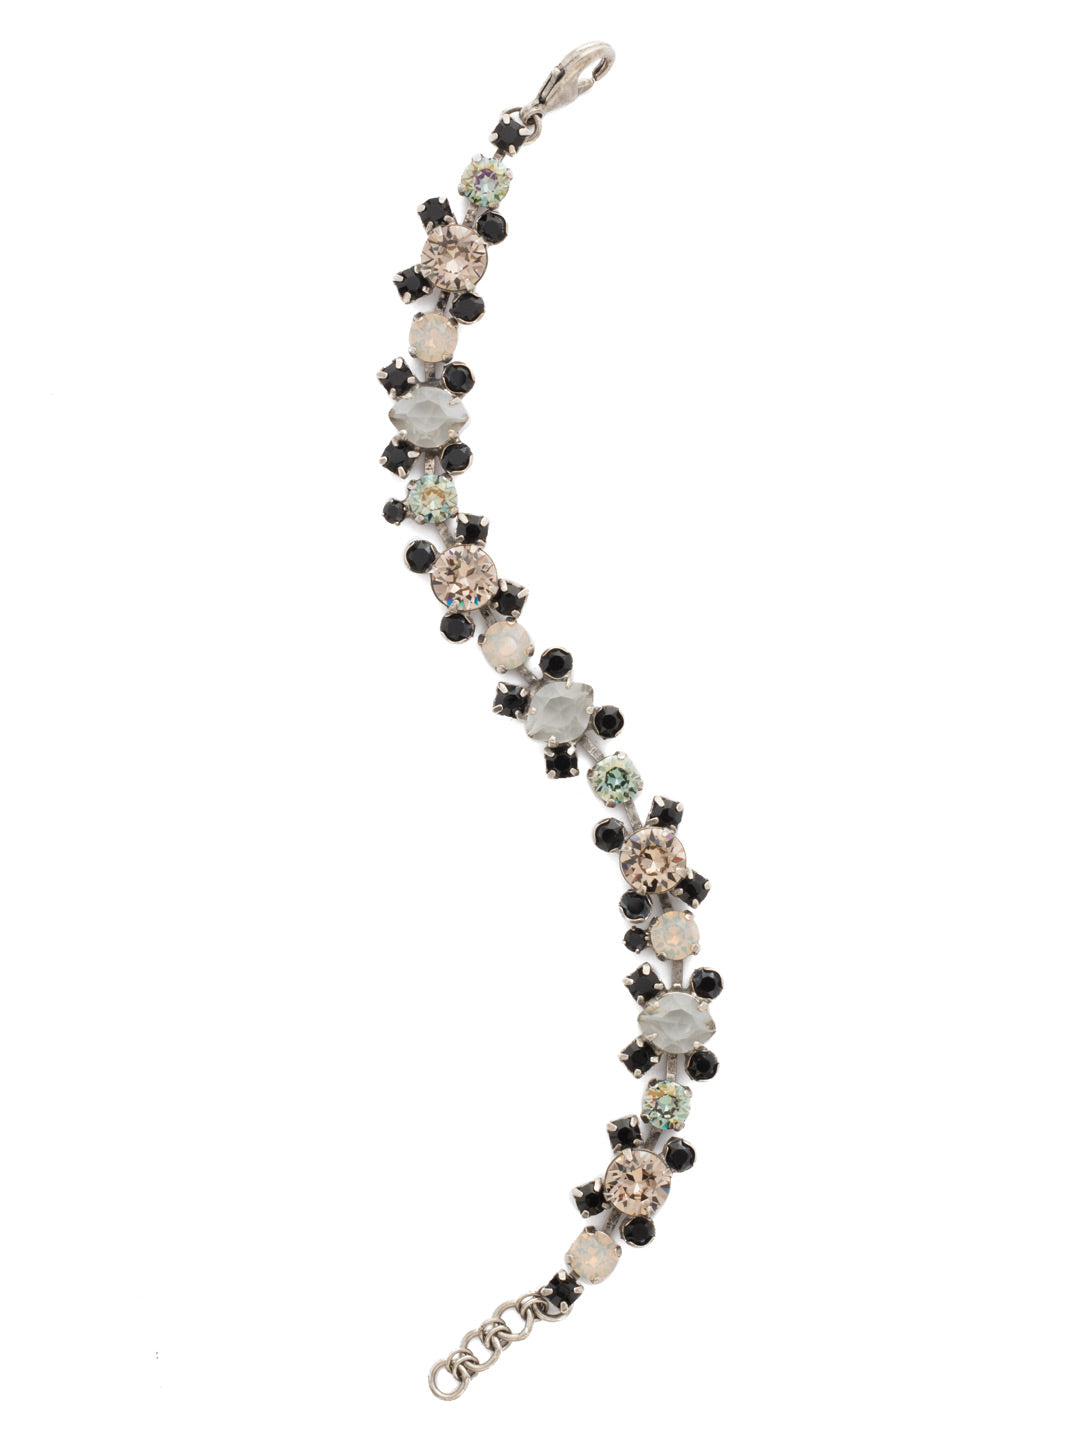 Perfect Harmony Bracelet - BDK11ASBON - <p>This classic bracelet features stations of crystal clusters alternating between round cut and pear shaped central stones, blending in perfect harmony! From Sorrelli's Black Onyx collection in our Antique Silver-tone finish.</p>